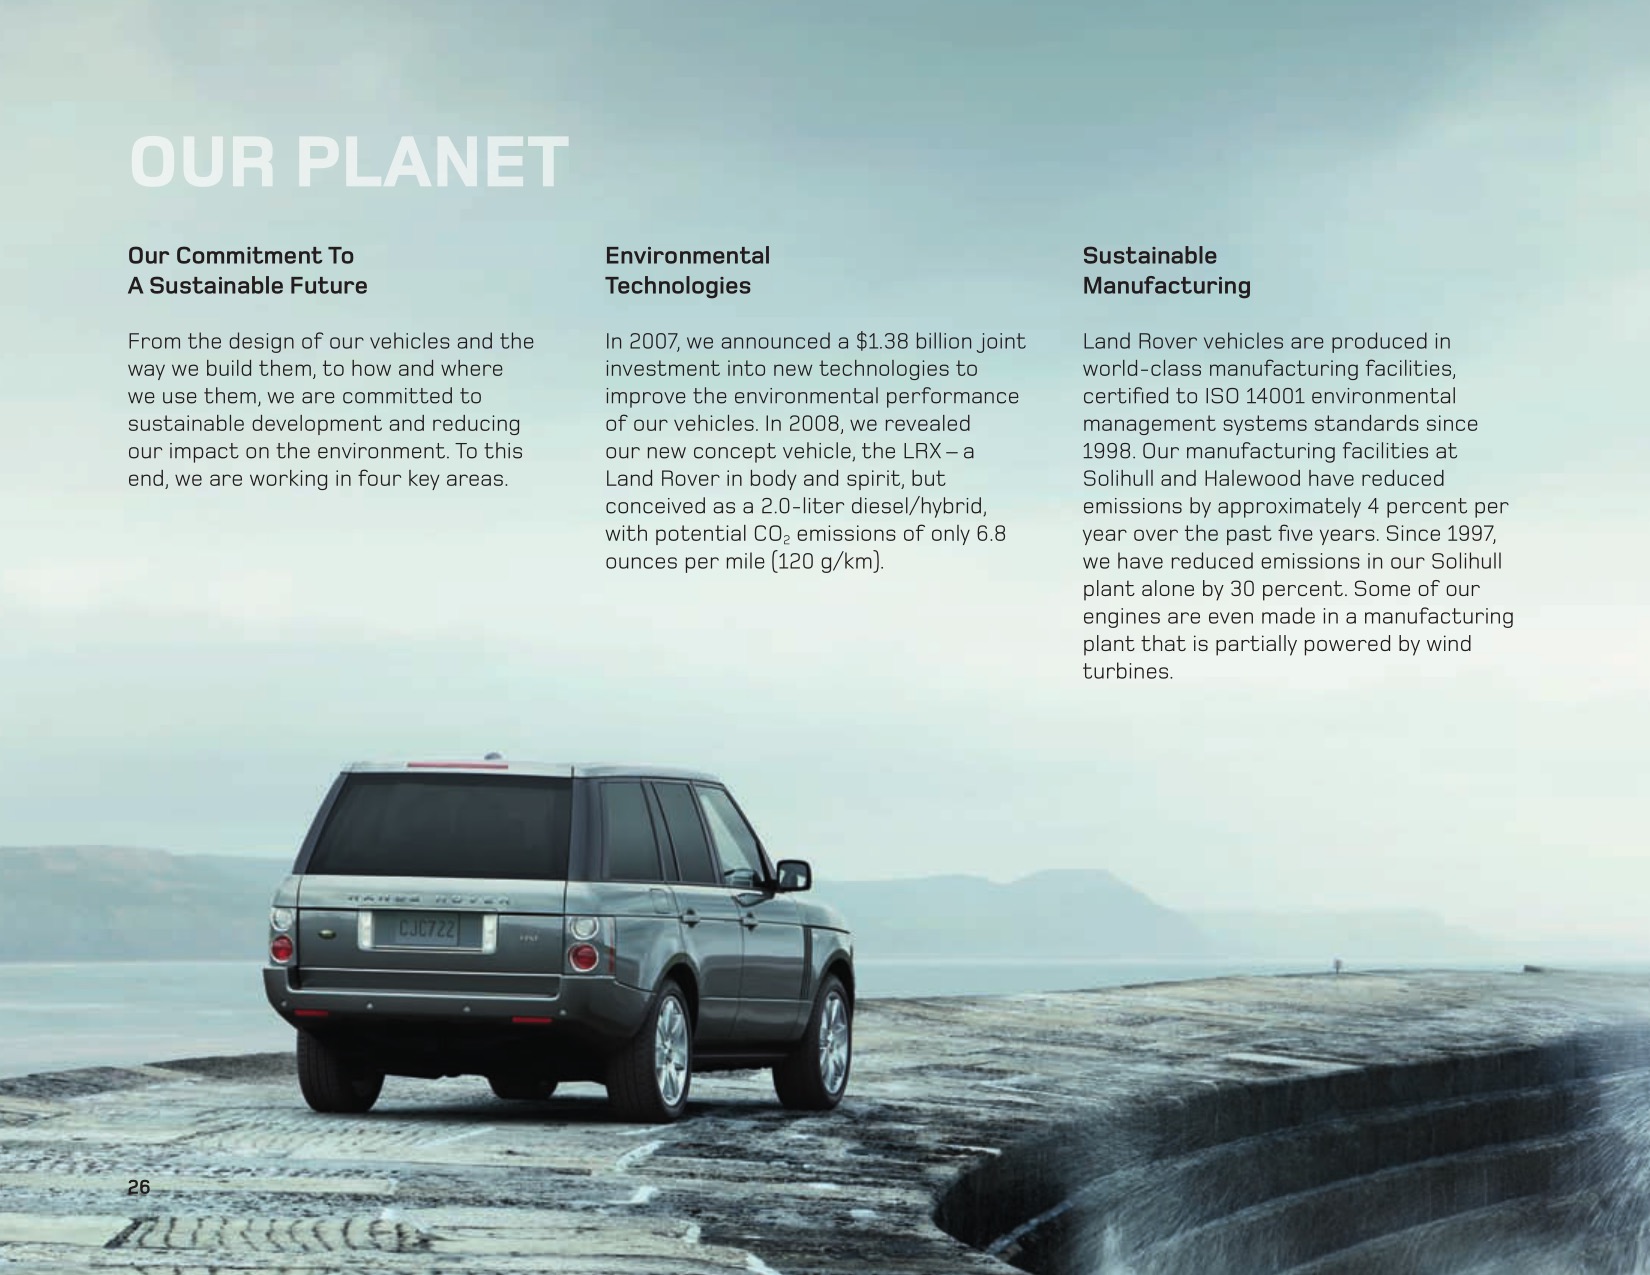 2009 Land Rover Brochure Page 16